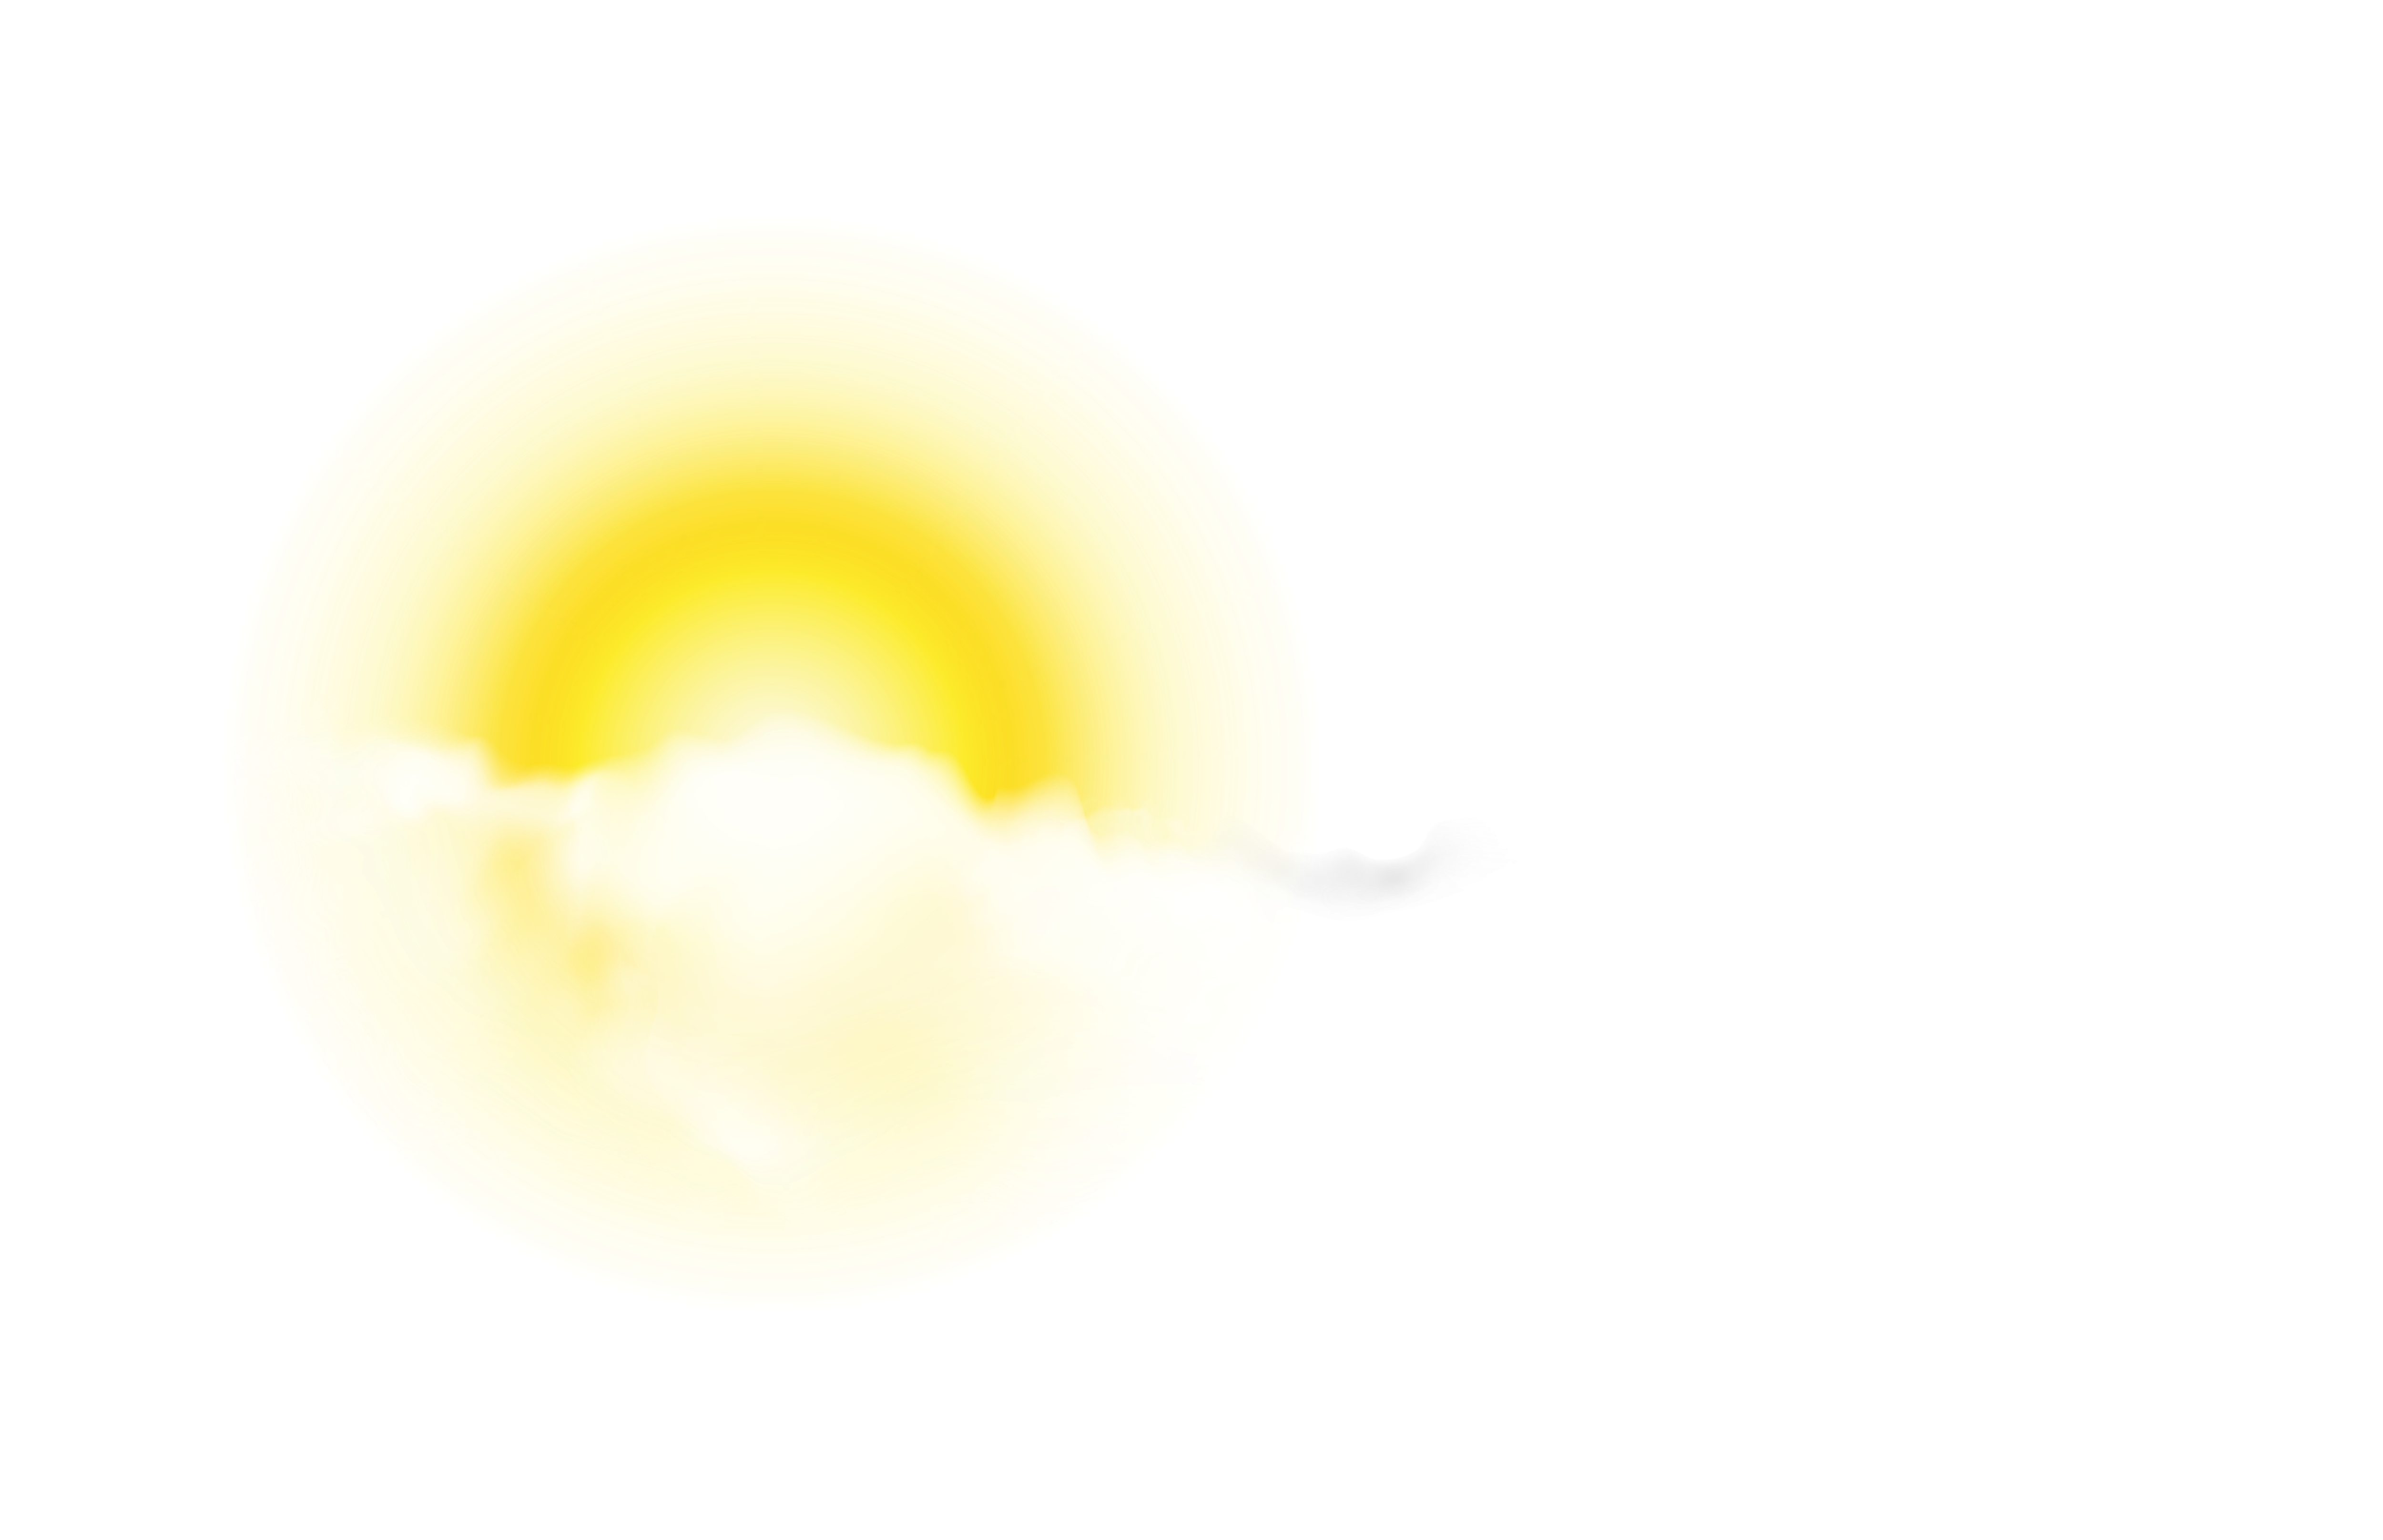 Full Moon With Clouds Png - Sun With Clouds Png, Transparent Png